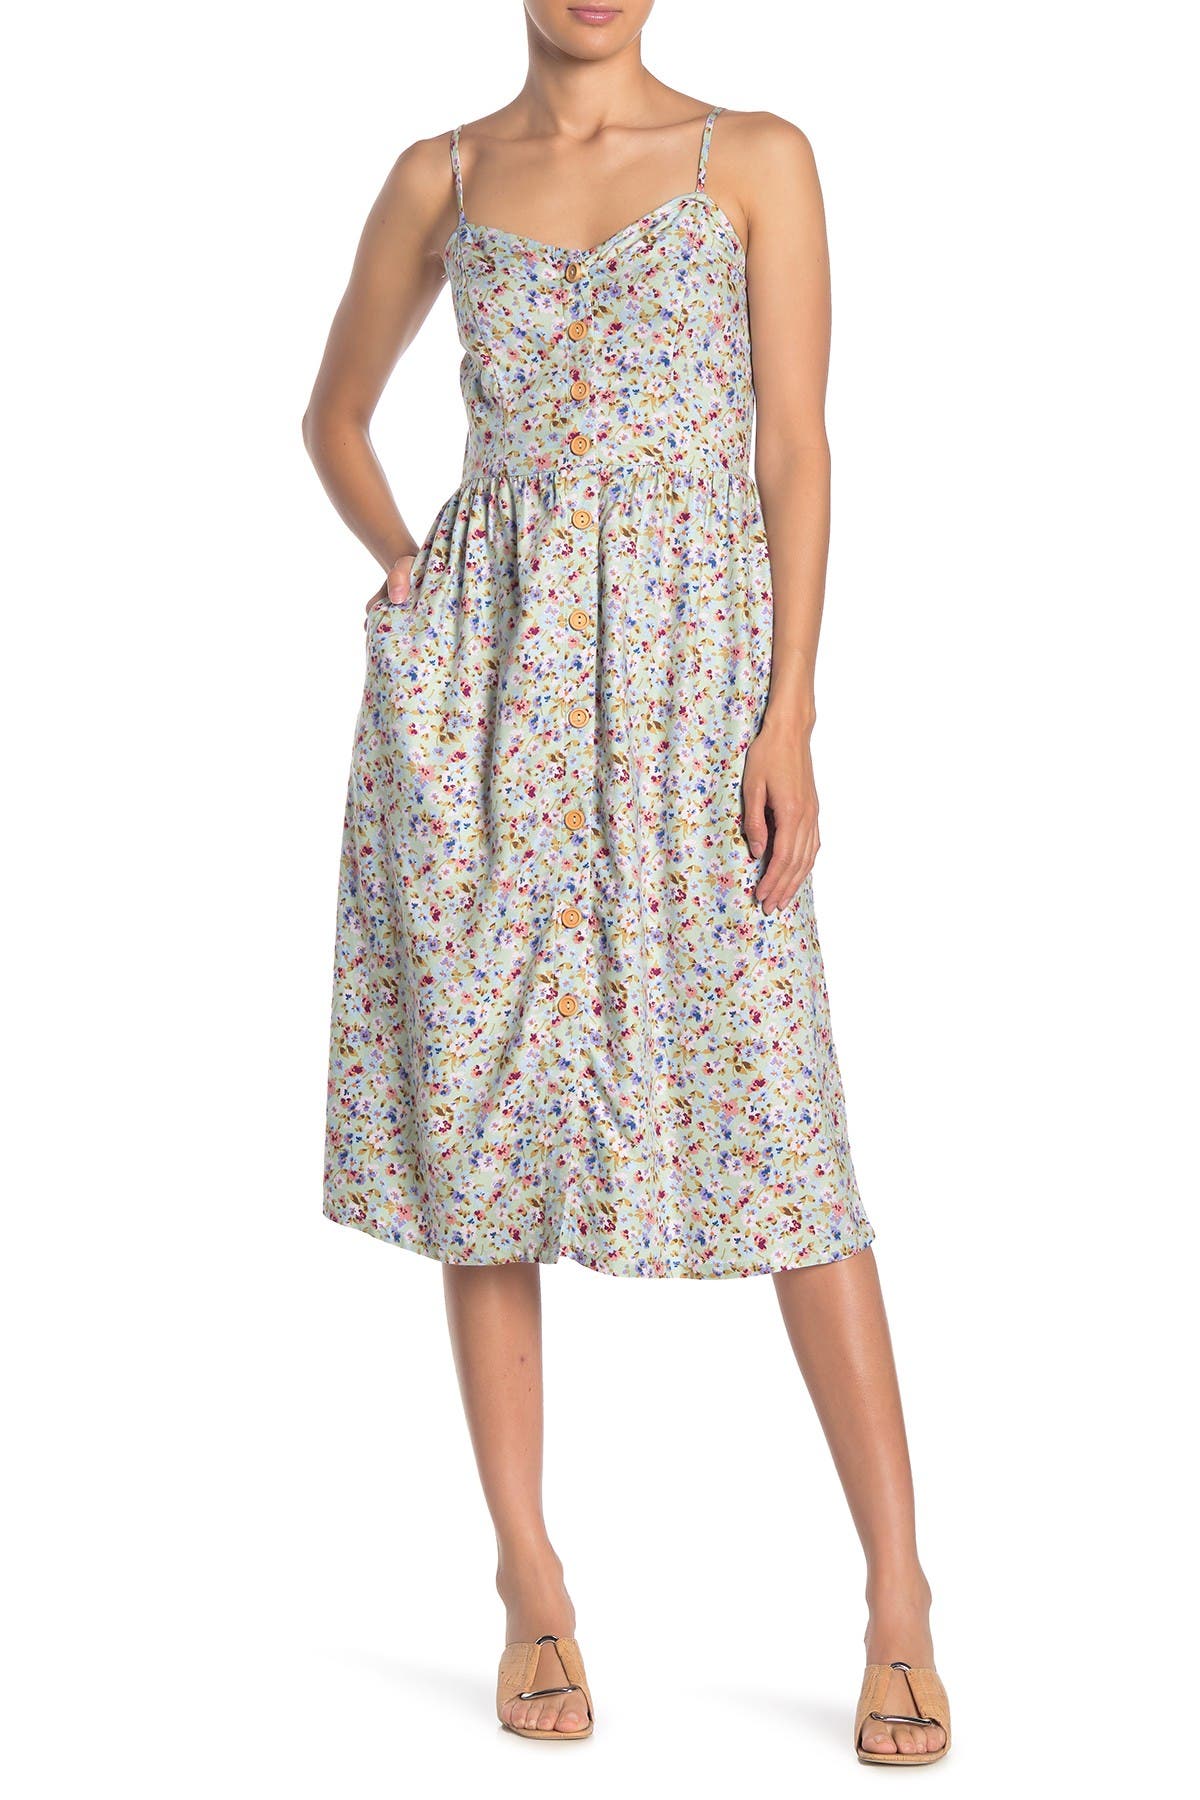 Mimi Chica | Floral Print Front Button Midi Dress | Nordstrom Rack